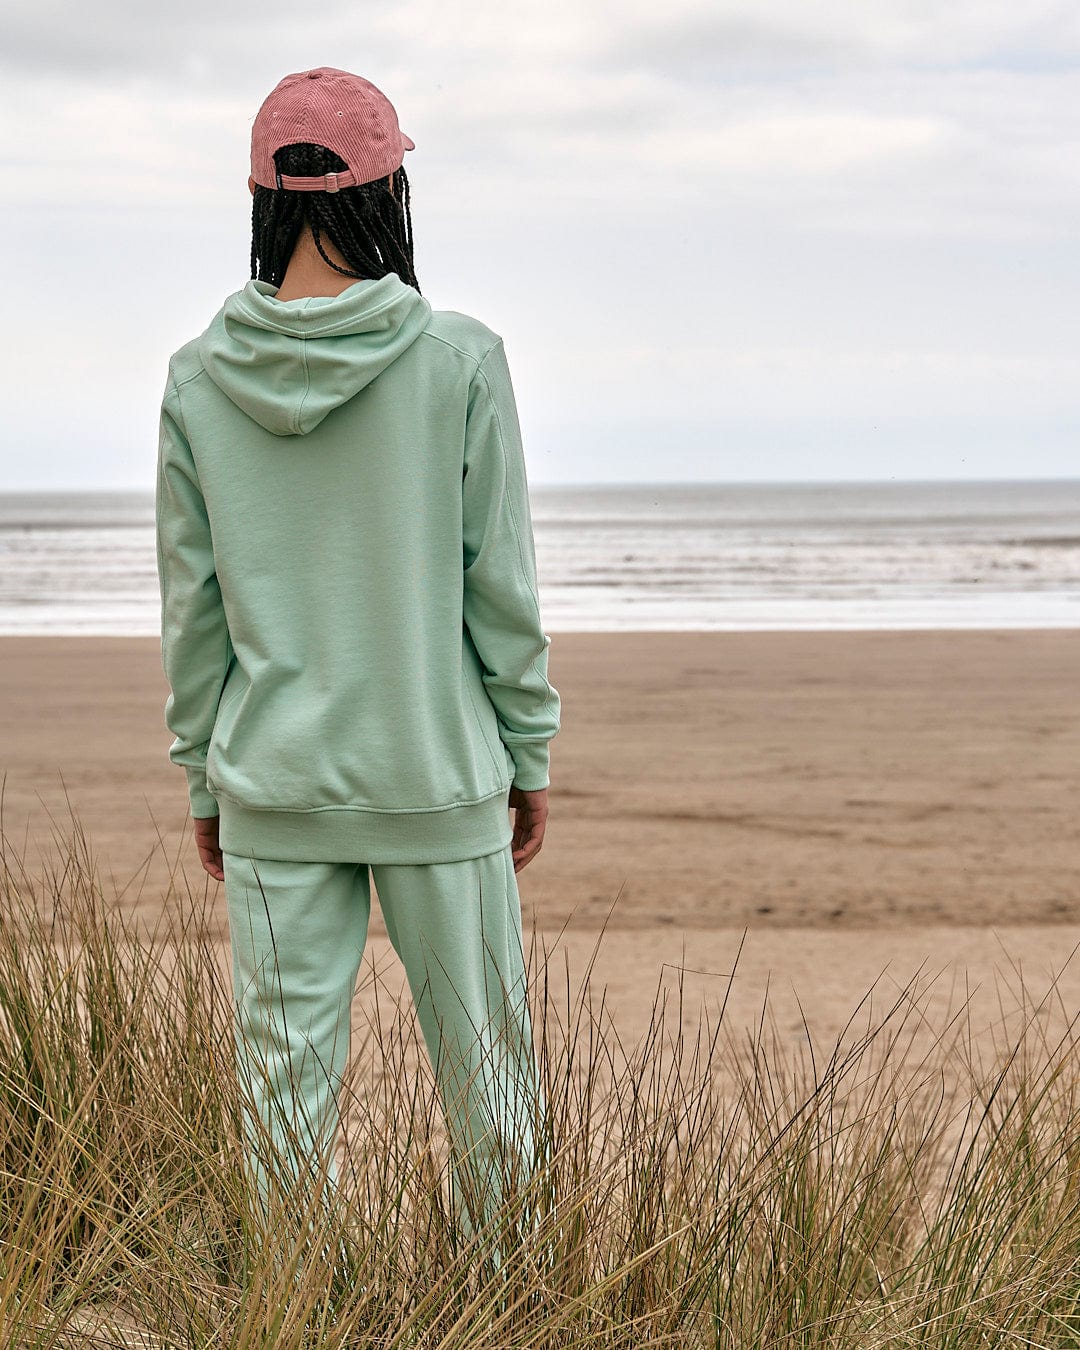 A person standing on a beach looking at the ocean wearing Shelley - Womens Jogger - Light Green by Saltrock.